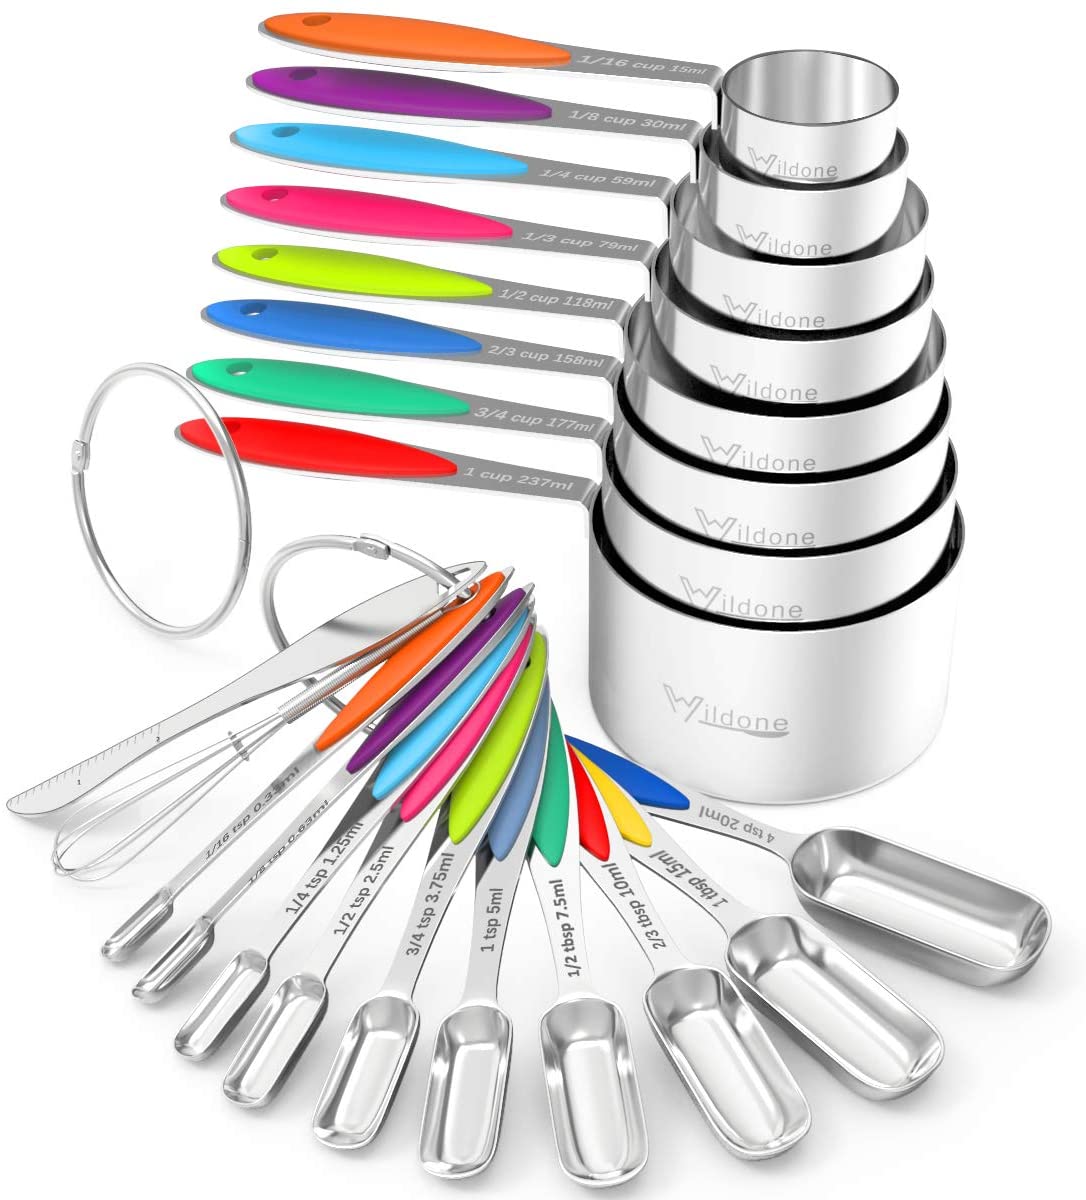 6. Wildone Measuring Cups and Spoons